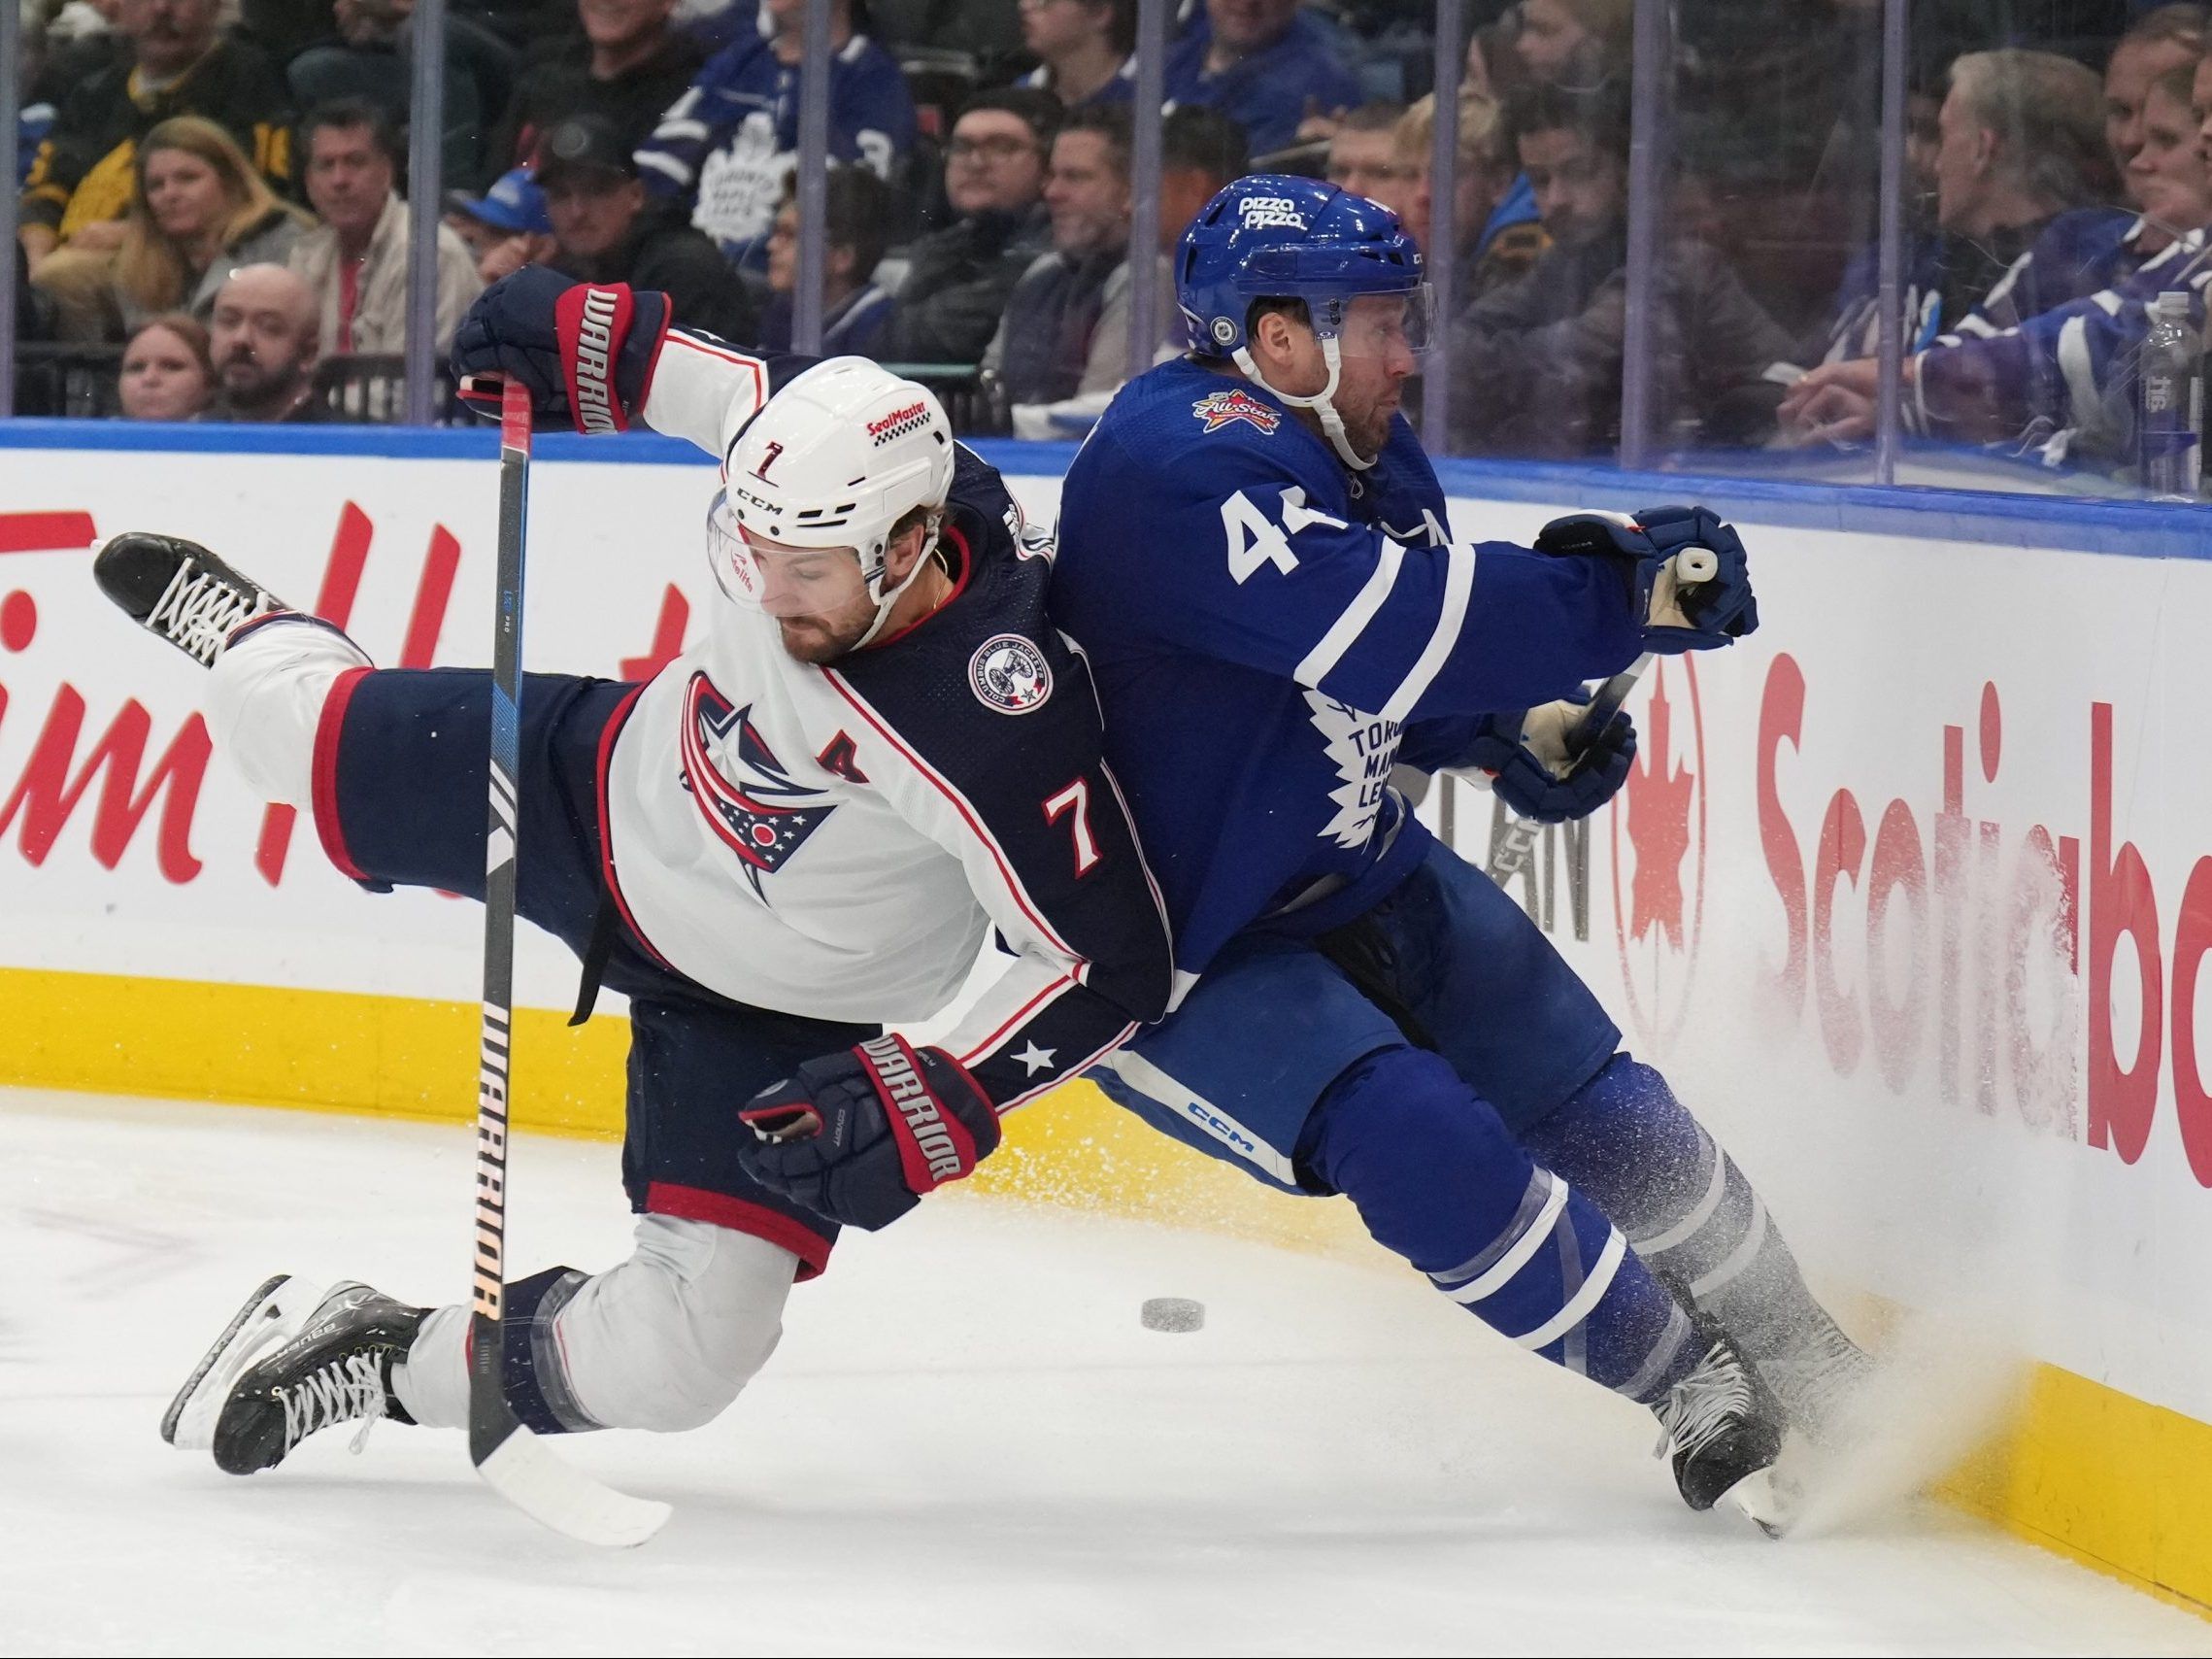 Leafs' stunning rally falls short, lose 6-5 to Columbus in overtime |  Belleville Intelligencer